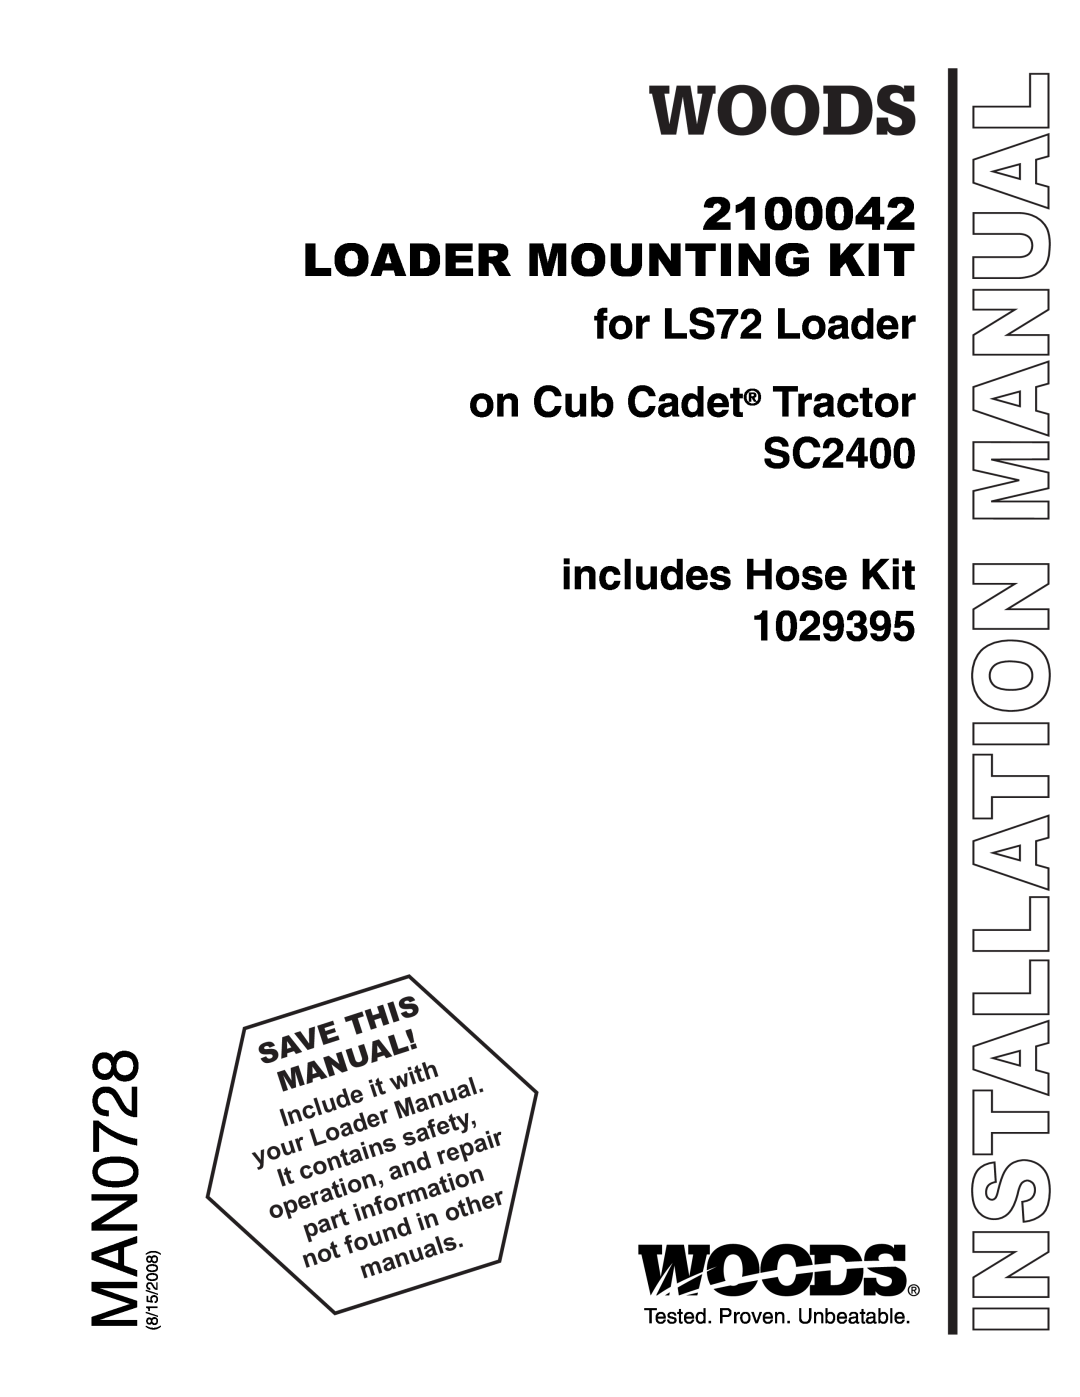 Woods Equipment 2100042 installation manual Loader Mounting Kit, for LS72 Loader on Cub Cadet Tractor SC2400, Save, This 